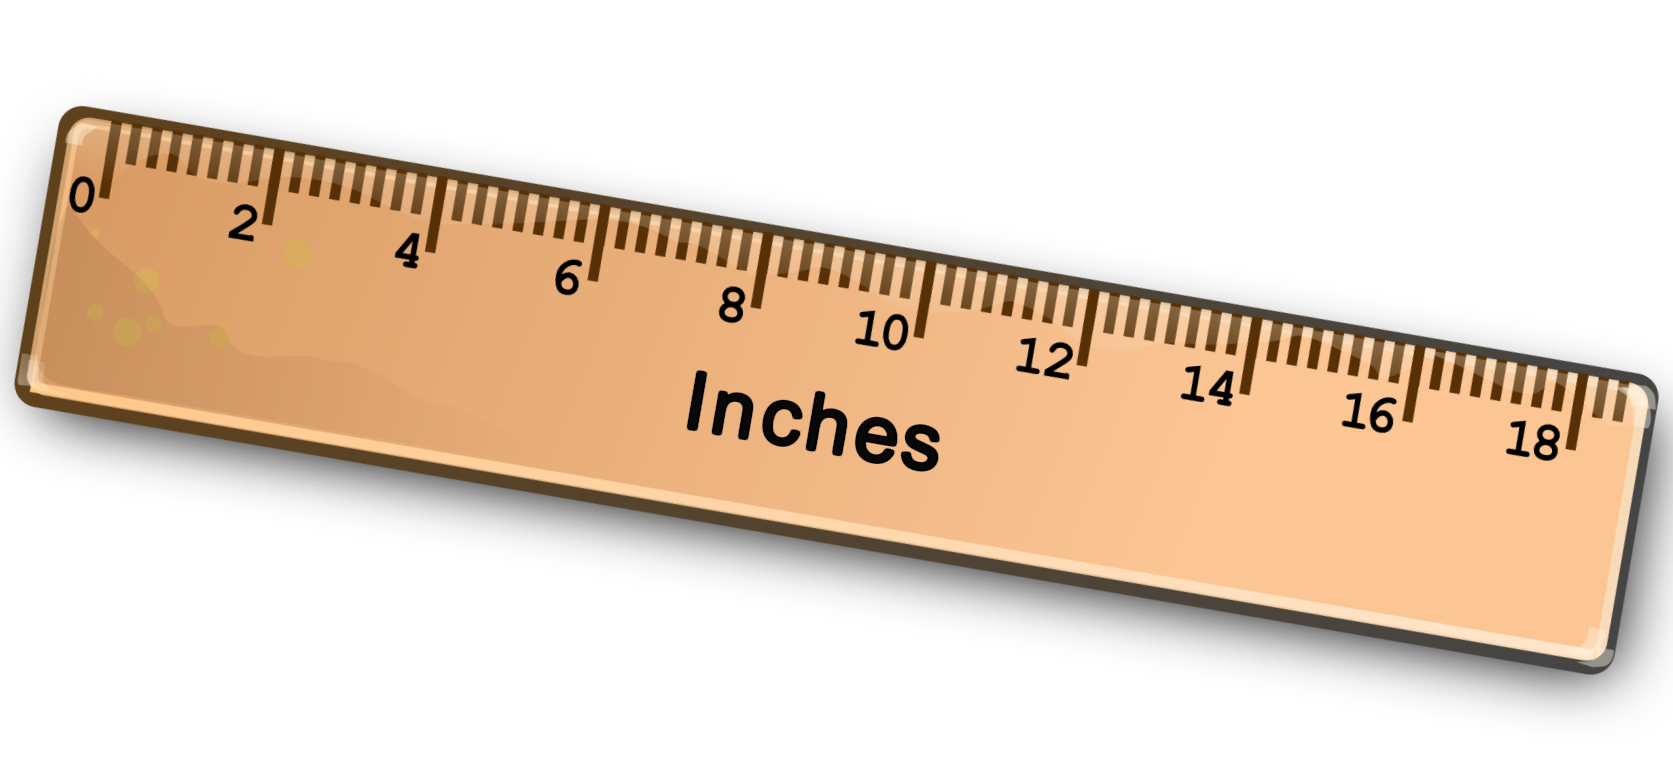 pictures of rulers in inches